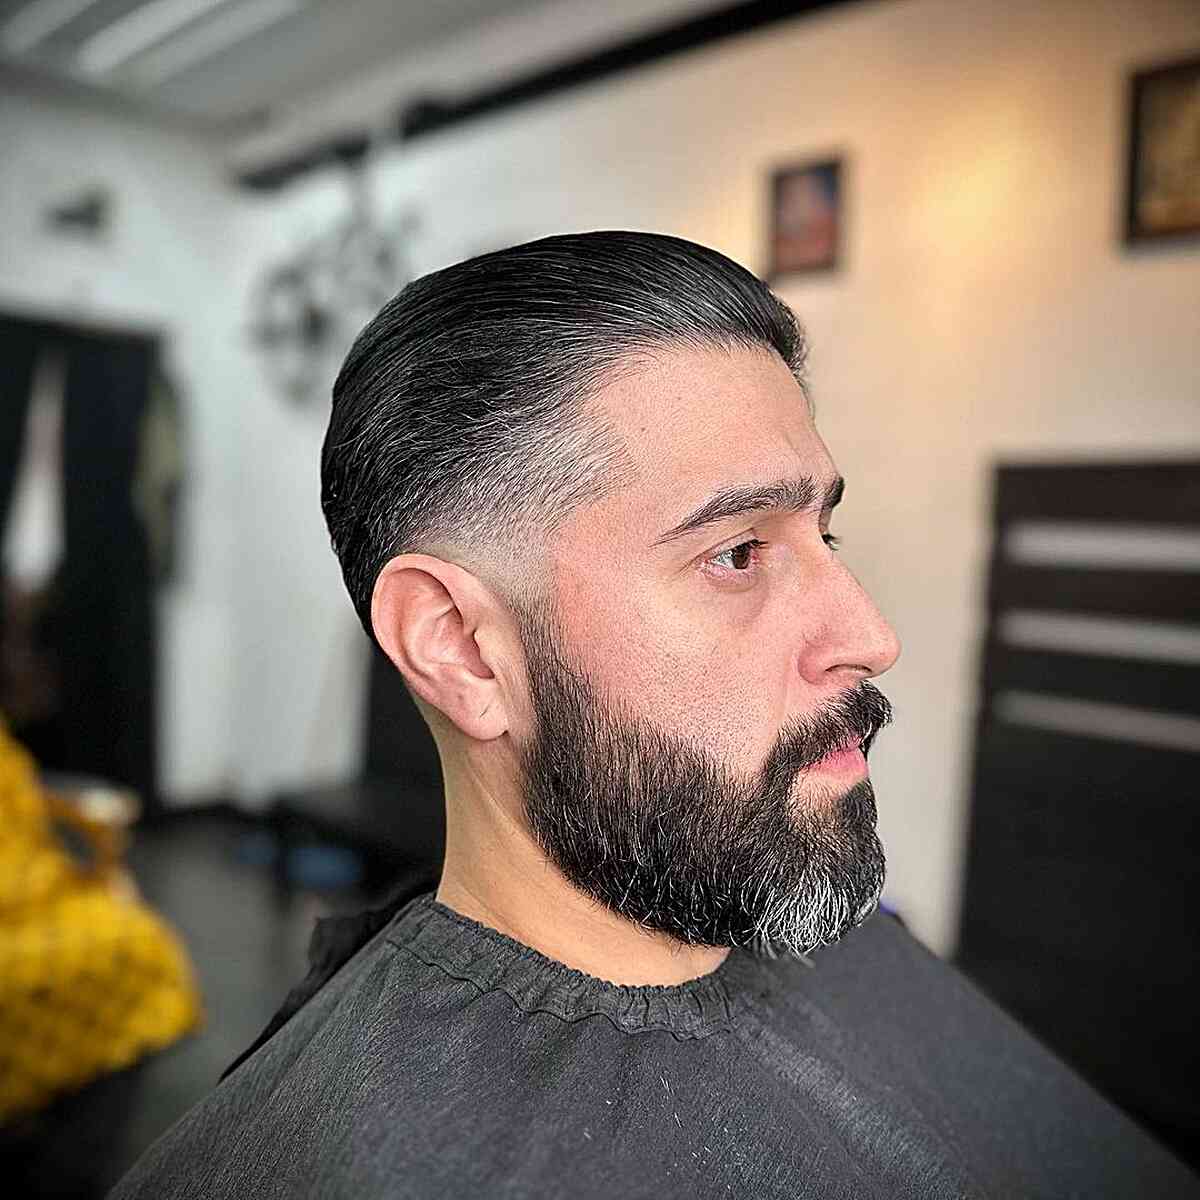 Slicked Back Straight Hair with Low Fade for Mature Men with Beard